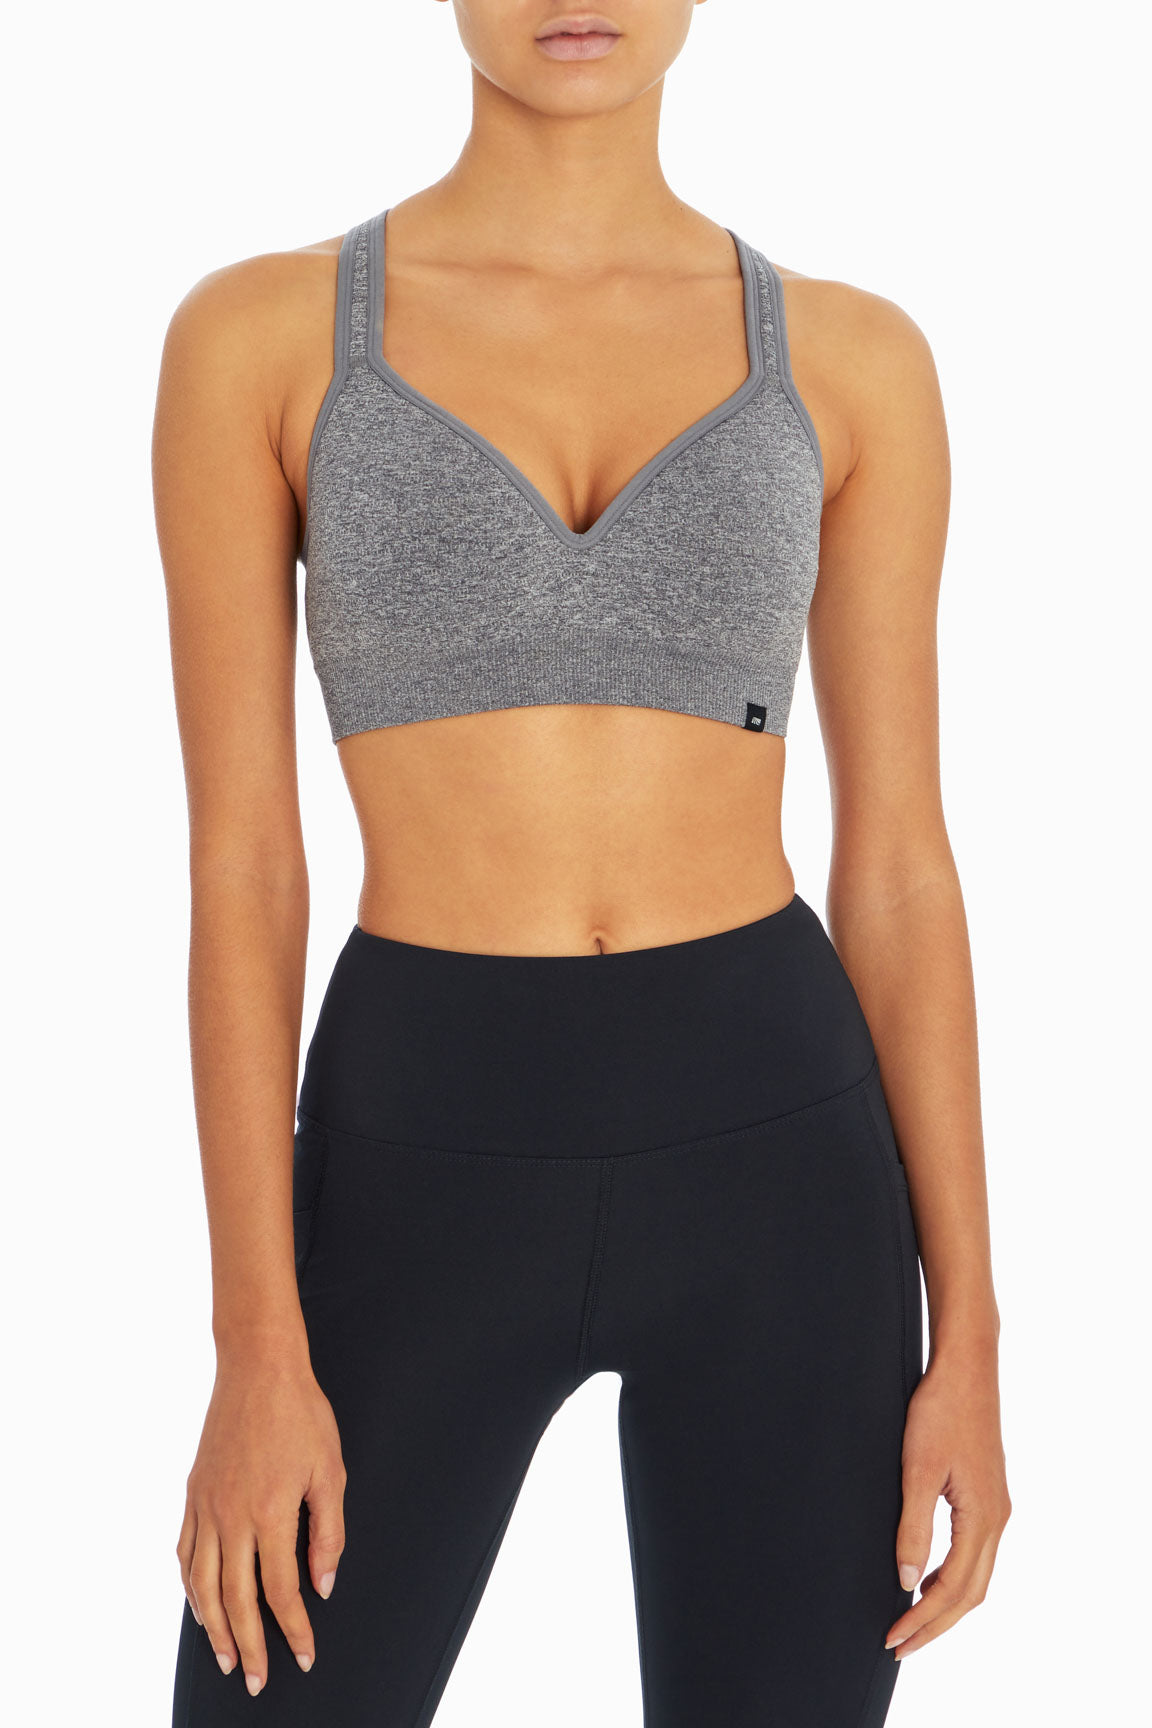 Women Underwear Solid Color Seamless Sports Bra with Removable Cups High  Support Workout Fitness Ladies Sport Bra (Color : Gray, Size : X-Large)